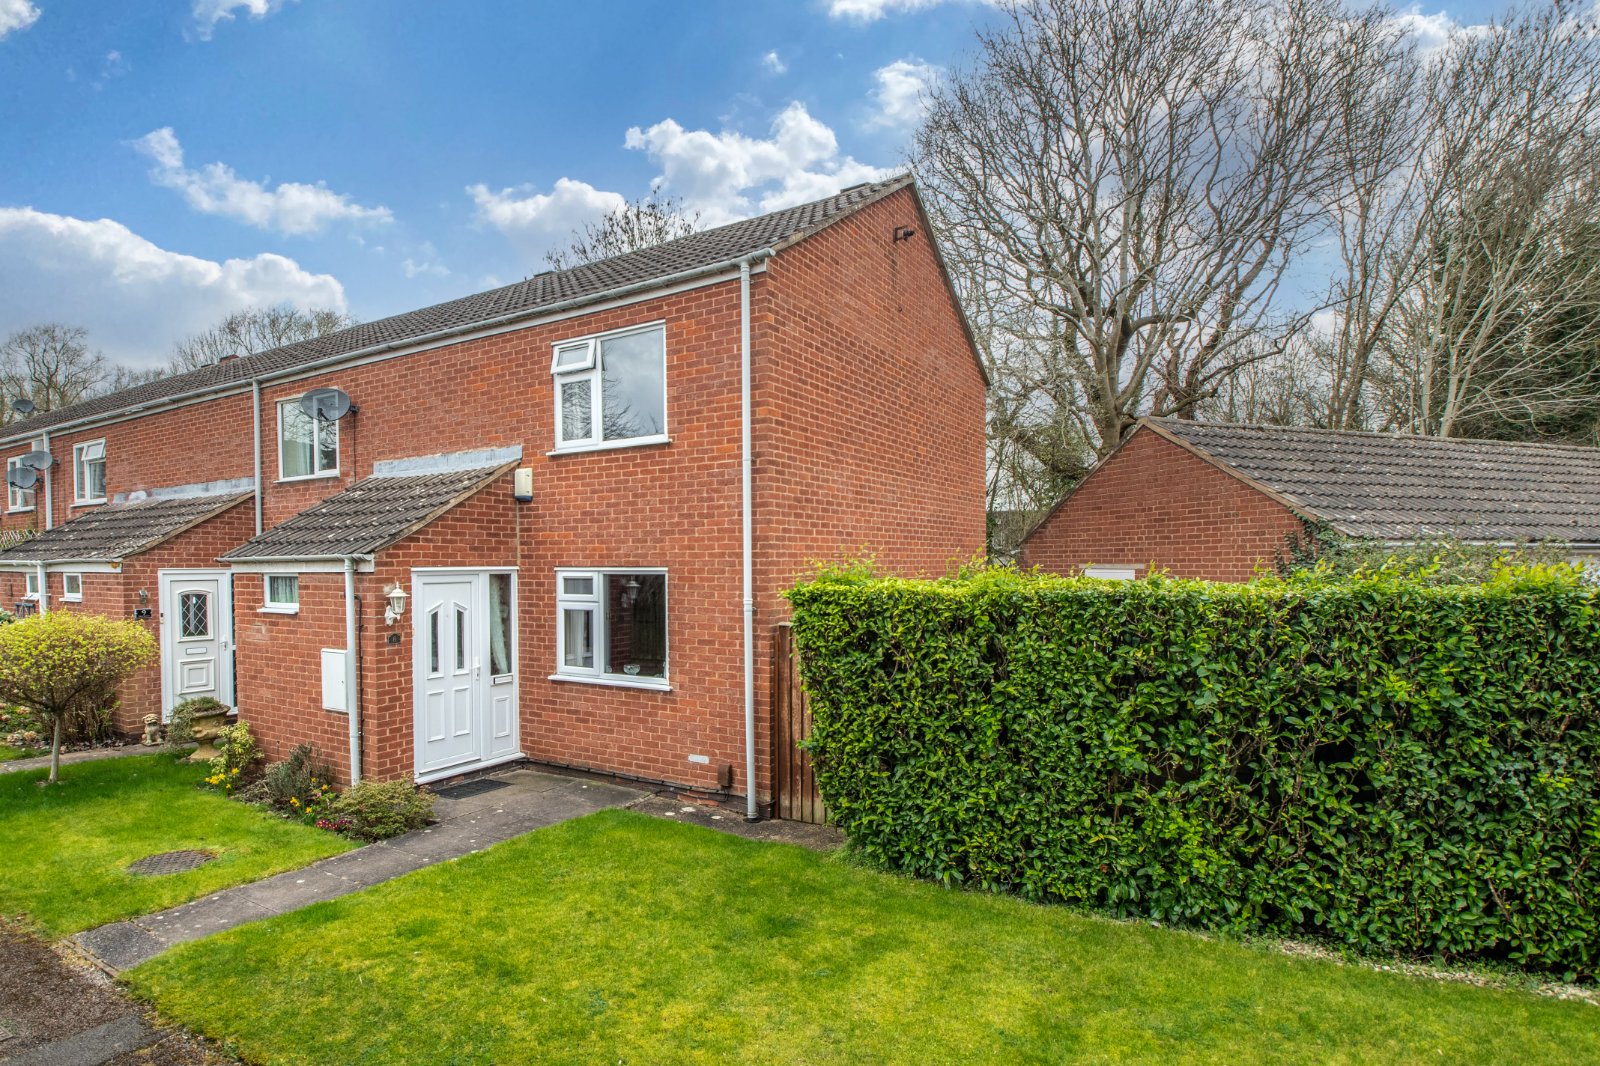 2 bed house for sale in Kitebrook Close, Redditch - Property Image 1